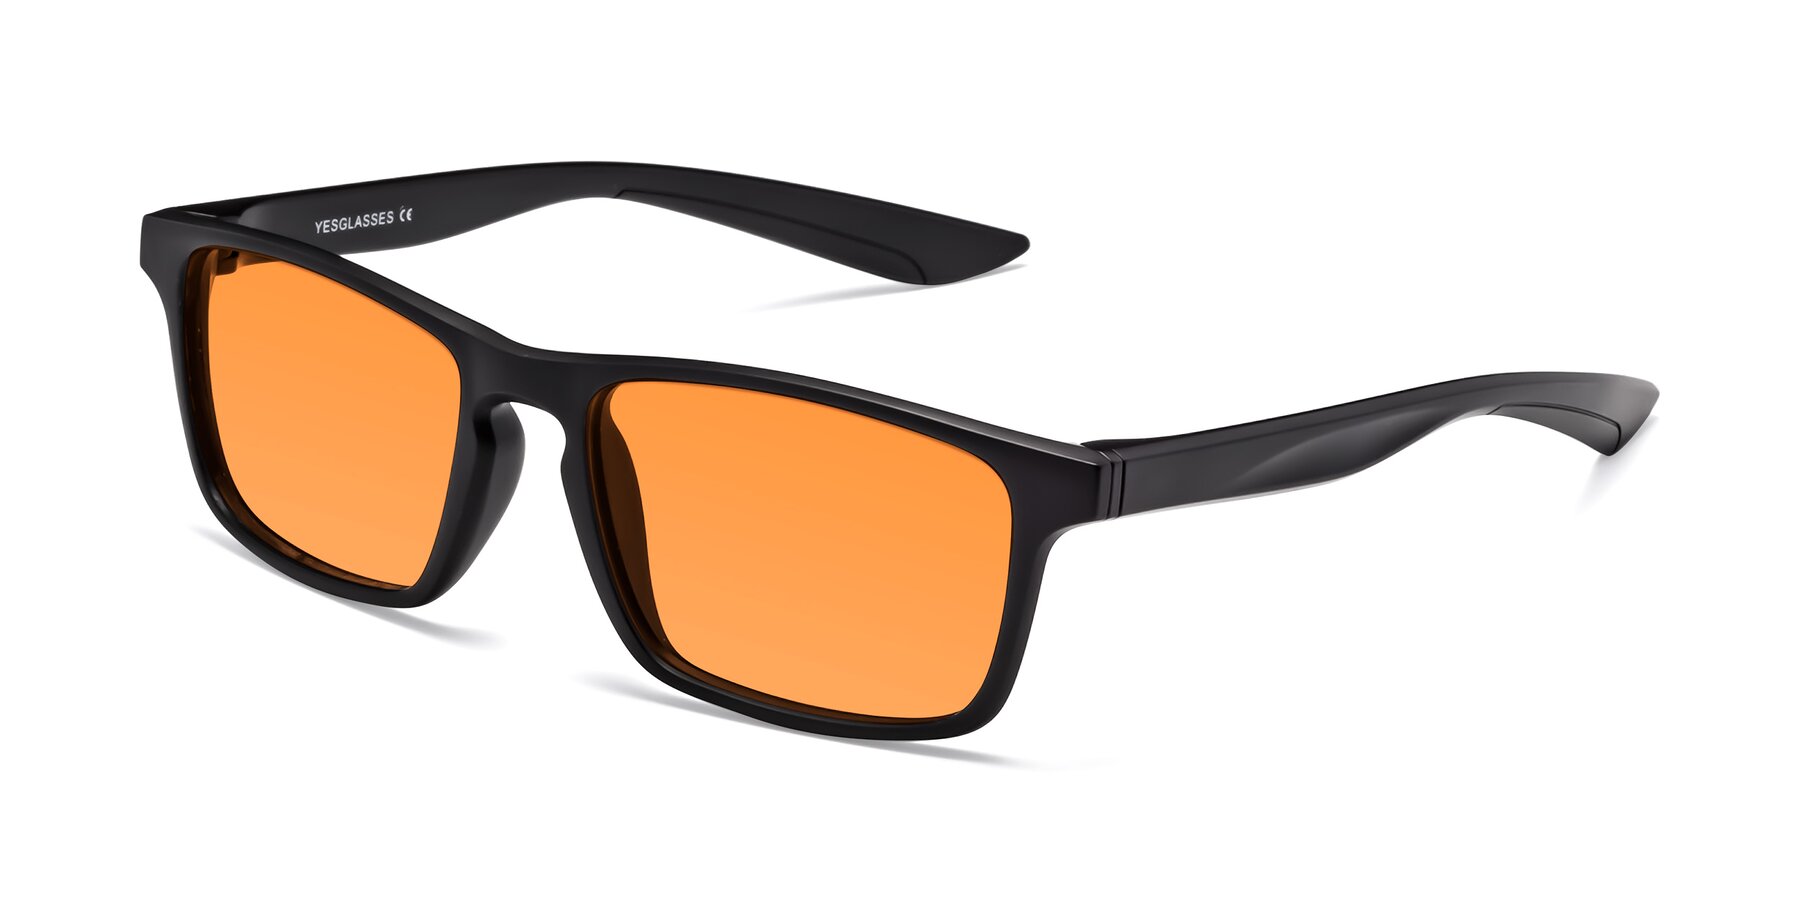 Angle of Passion in Matte Black with Orange Tinted Lenses